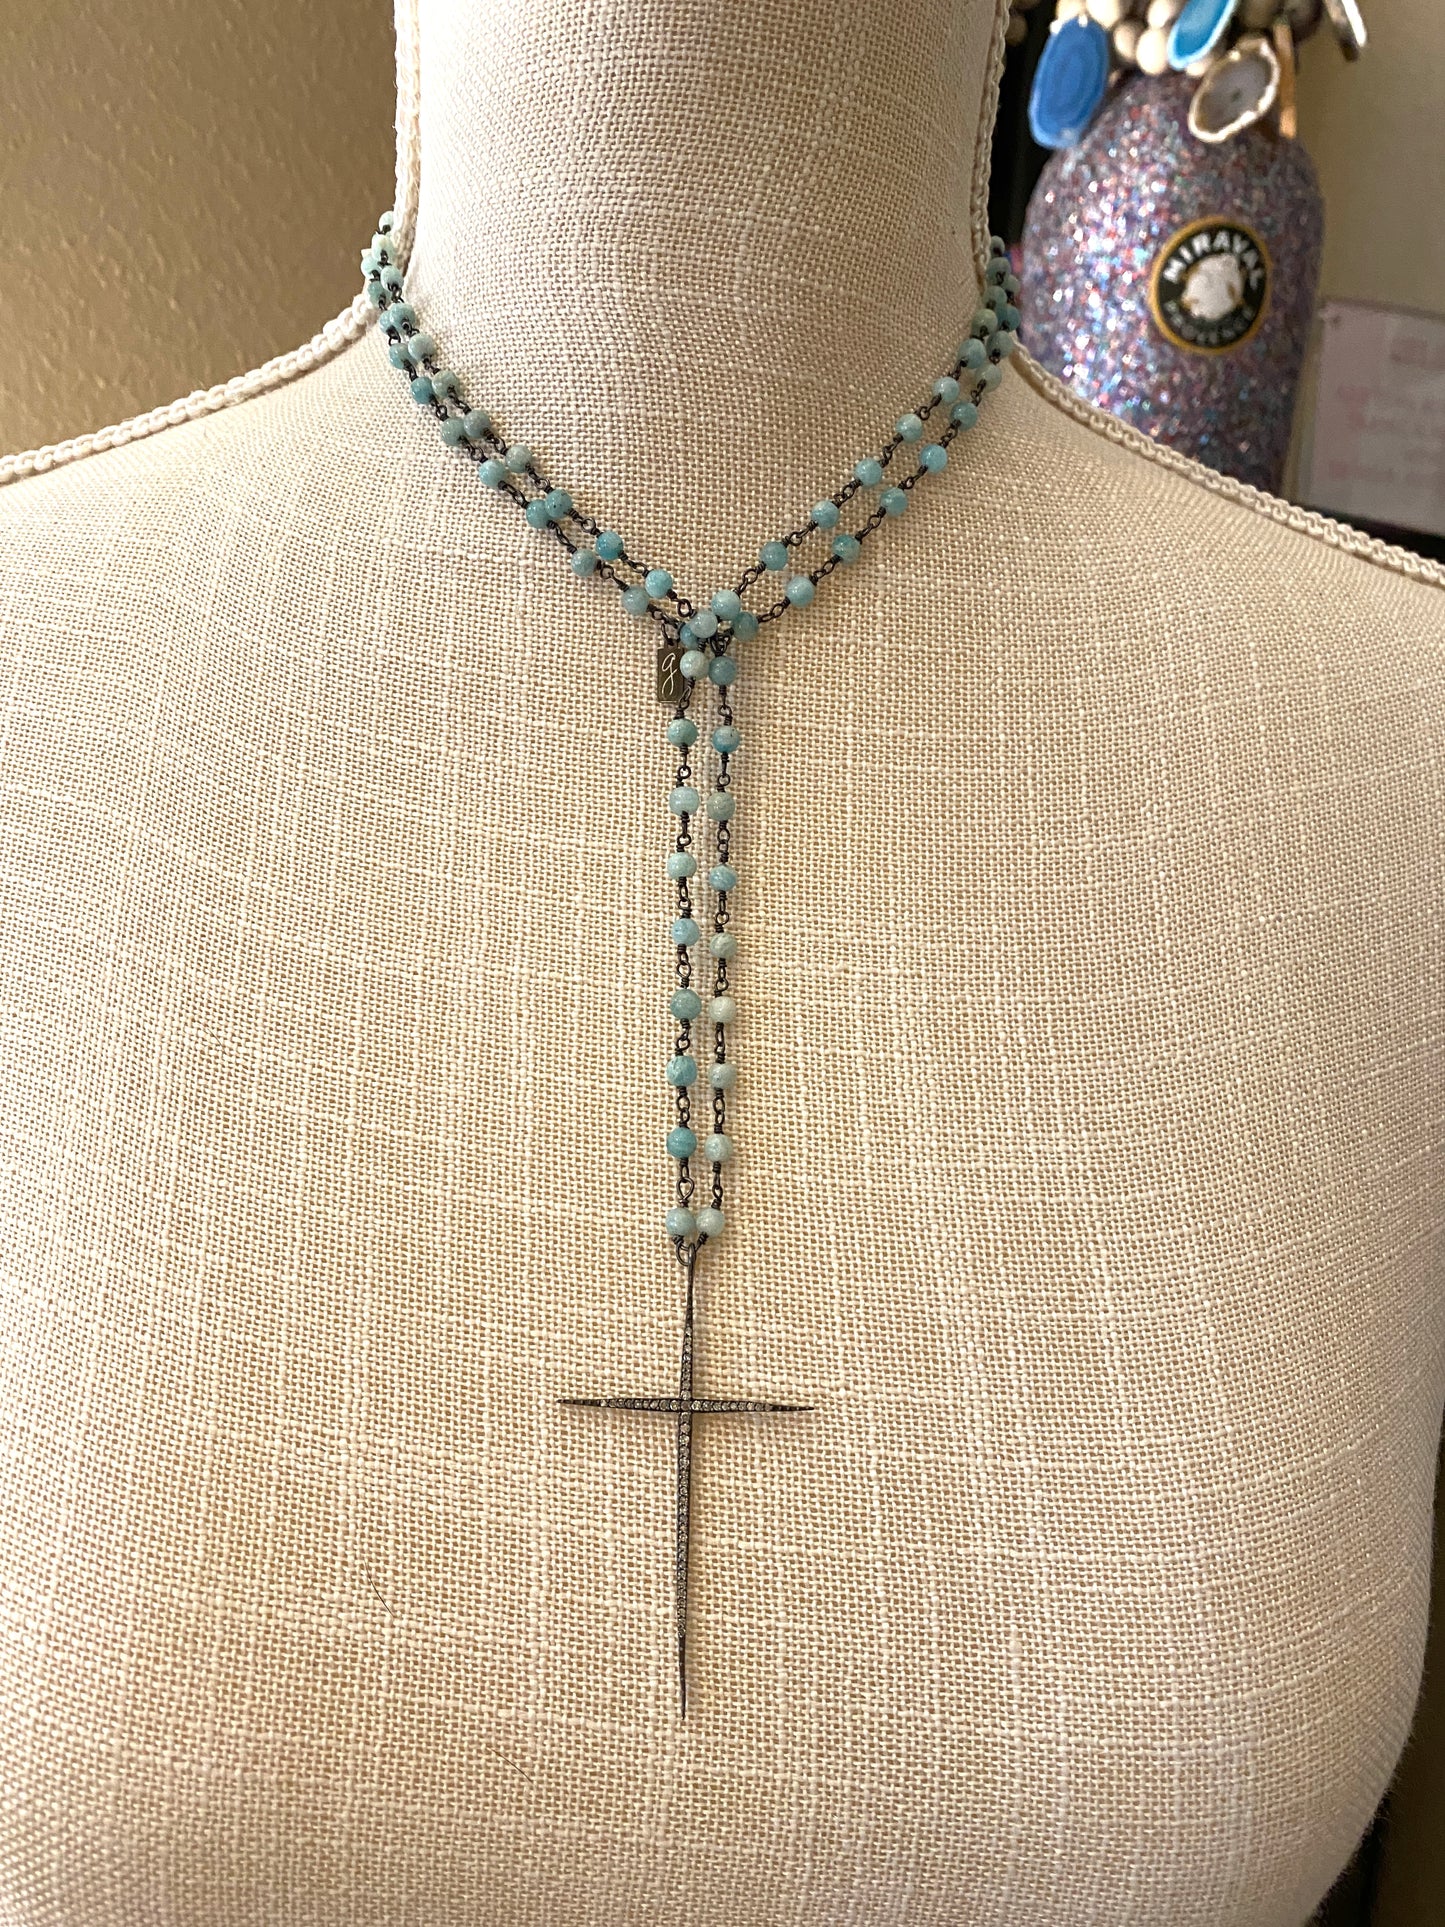 Chalcedony Rosary Style Beaded Chain Necklace with Pave Diamond Cross Pendant